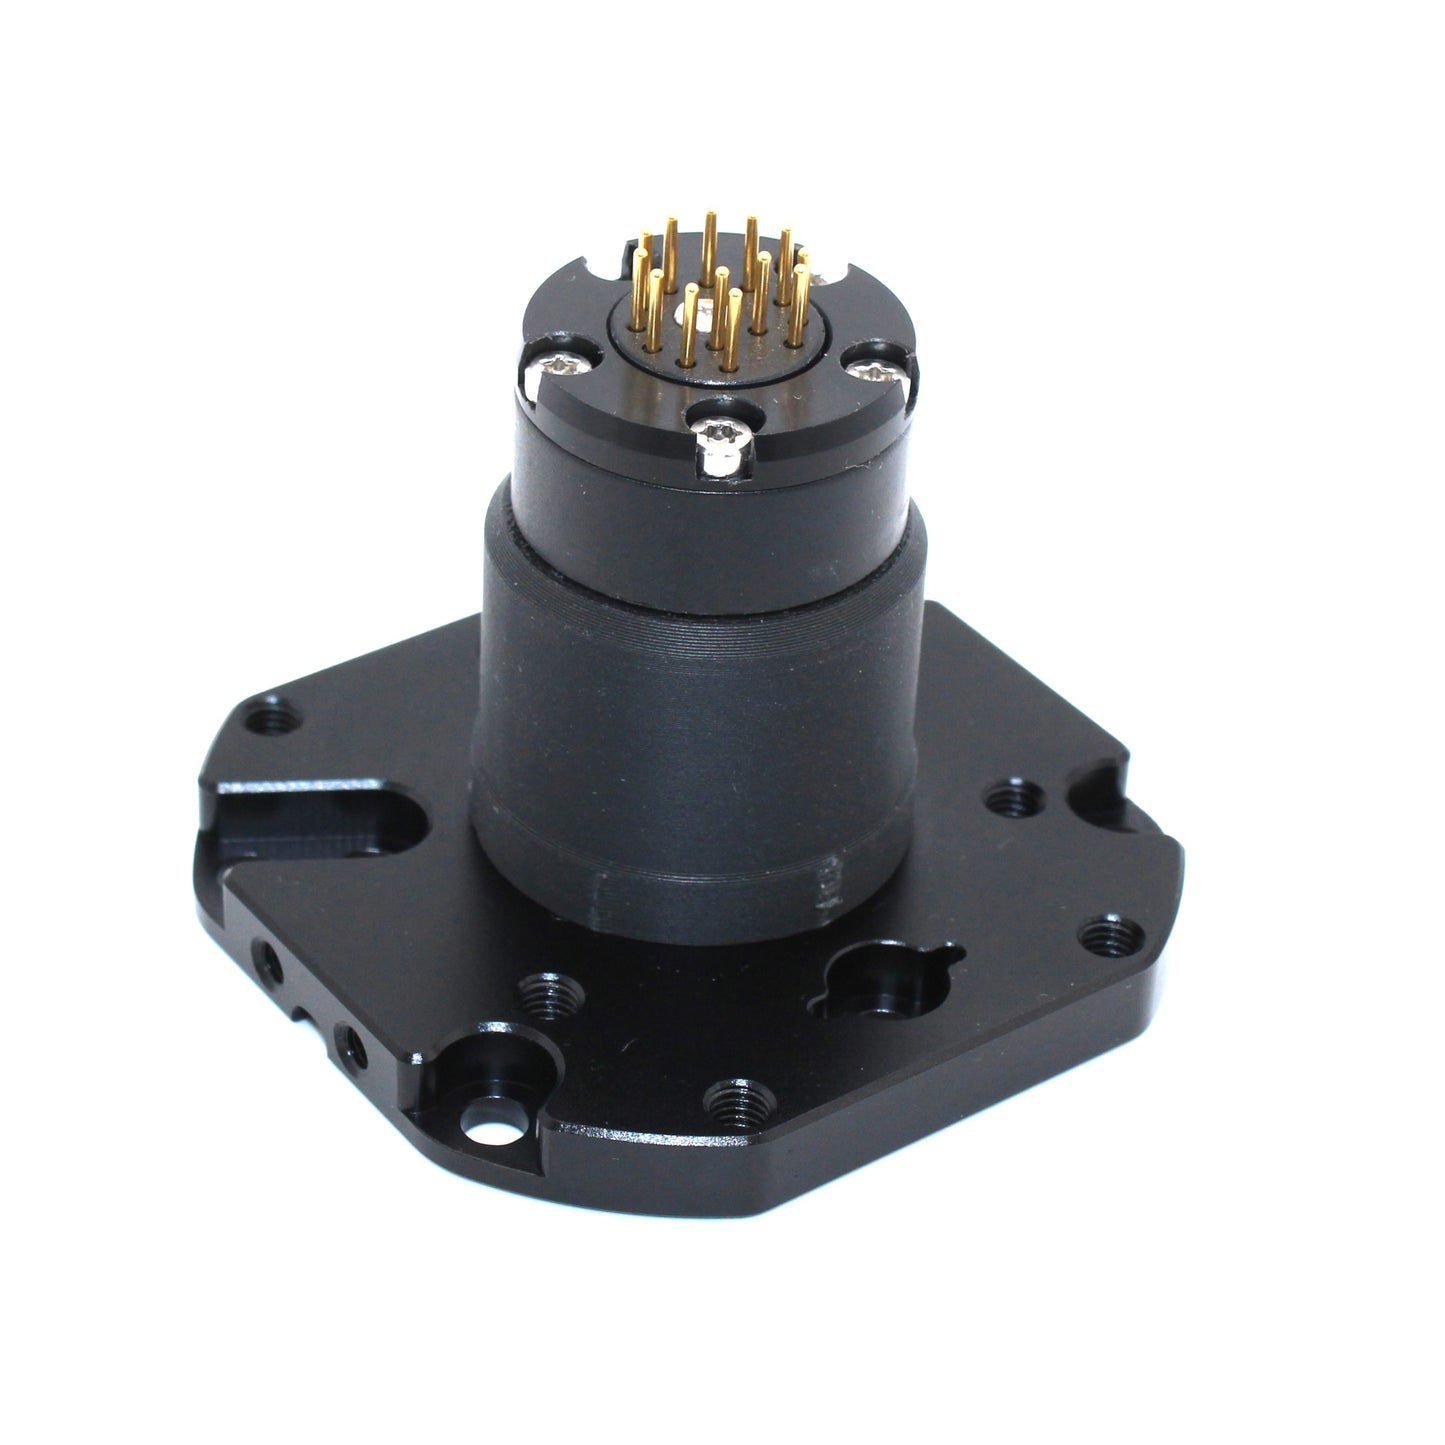 Adapter Fanatec older wheels to QR1 and QR2